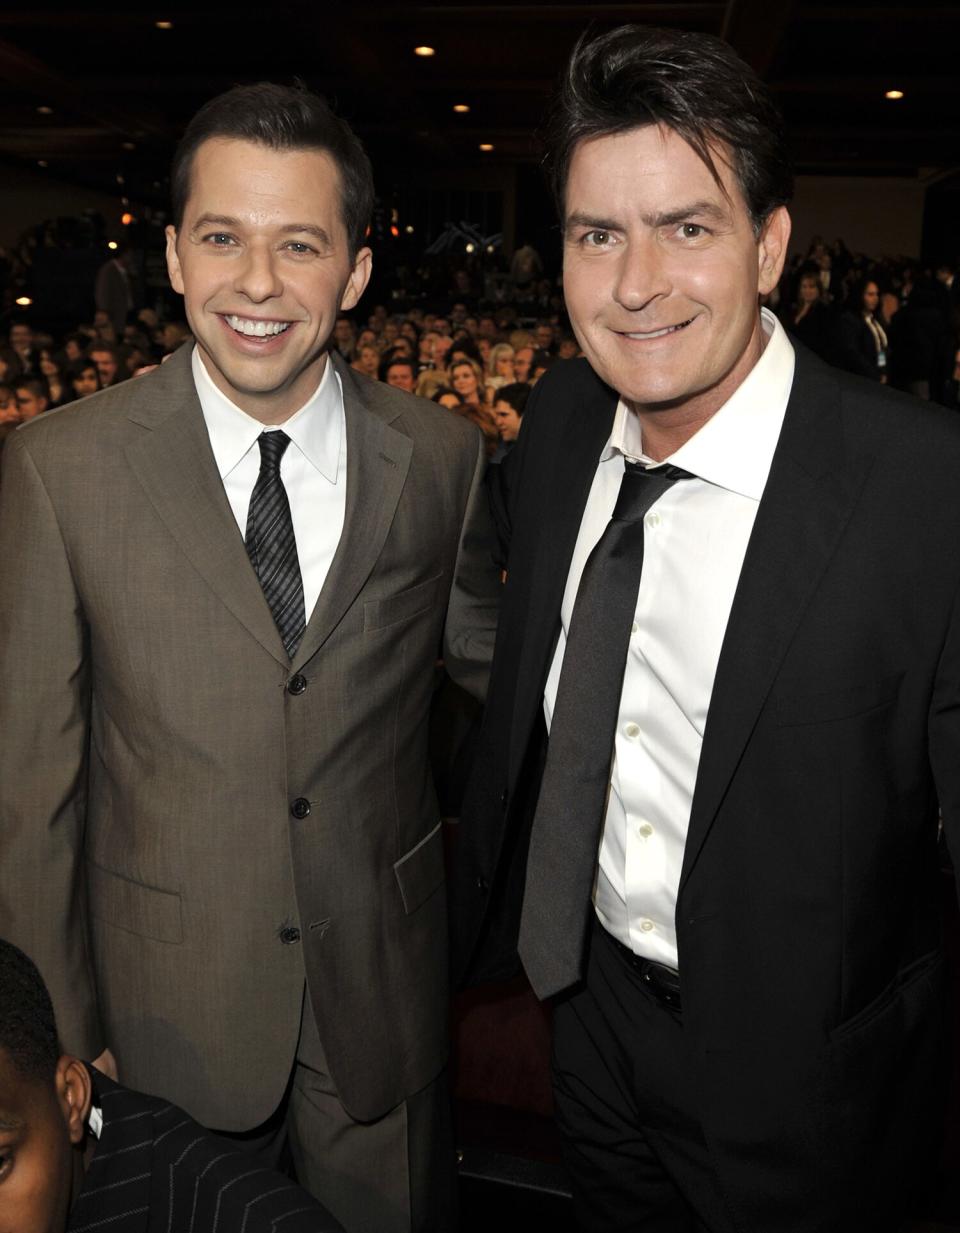 Jon Cryer and Charlie Sheen pose in the audience during the 35th Annual People's Choice Awards